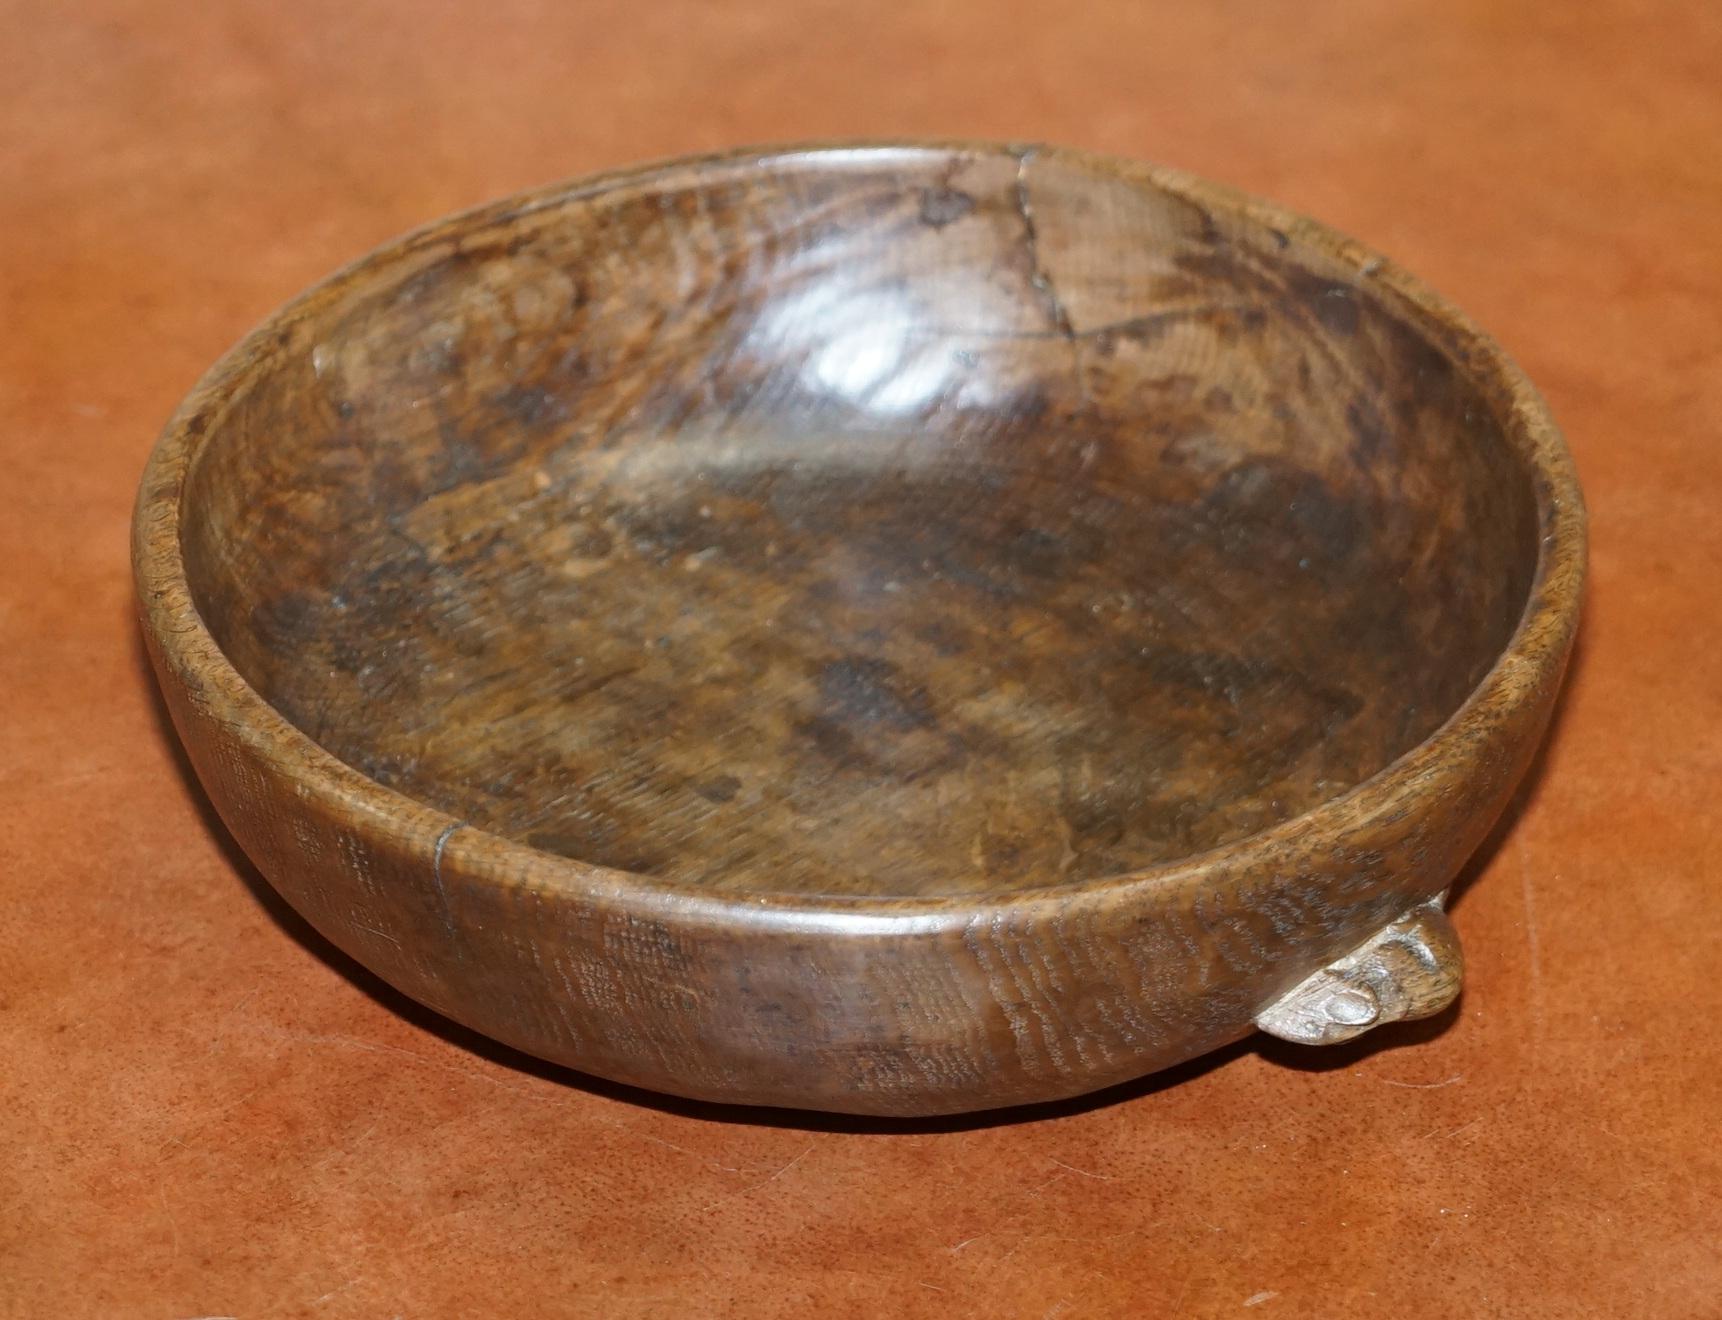 We are delighted to offer for sale this stunning original circa 1950’s Robert Thompson Mouseman Fruit or nut bowl

A stunning find, this piece has the mouse with the long tail and whiskers which means it was made within the lifetime of the great